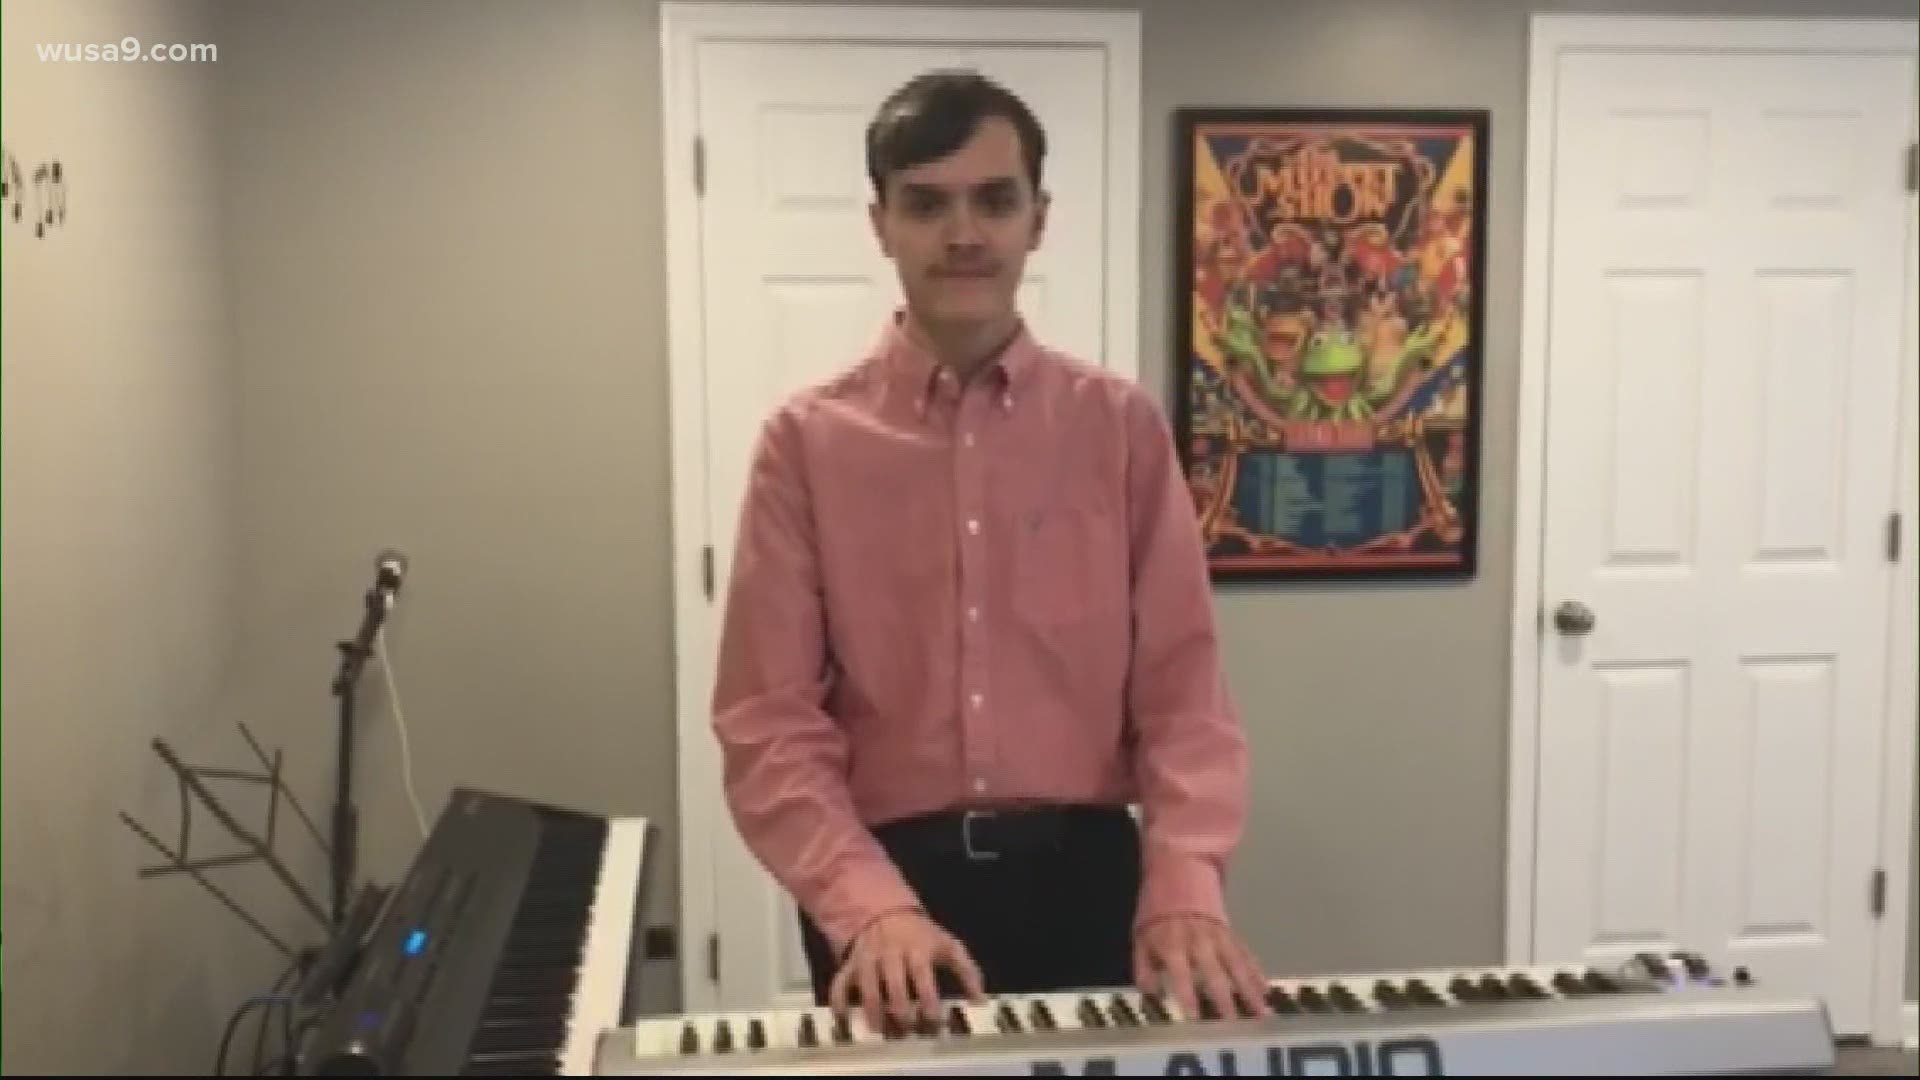 Noah Finch addresses the challenges of the pandemic for people with disabilities through song.